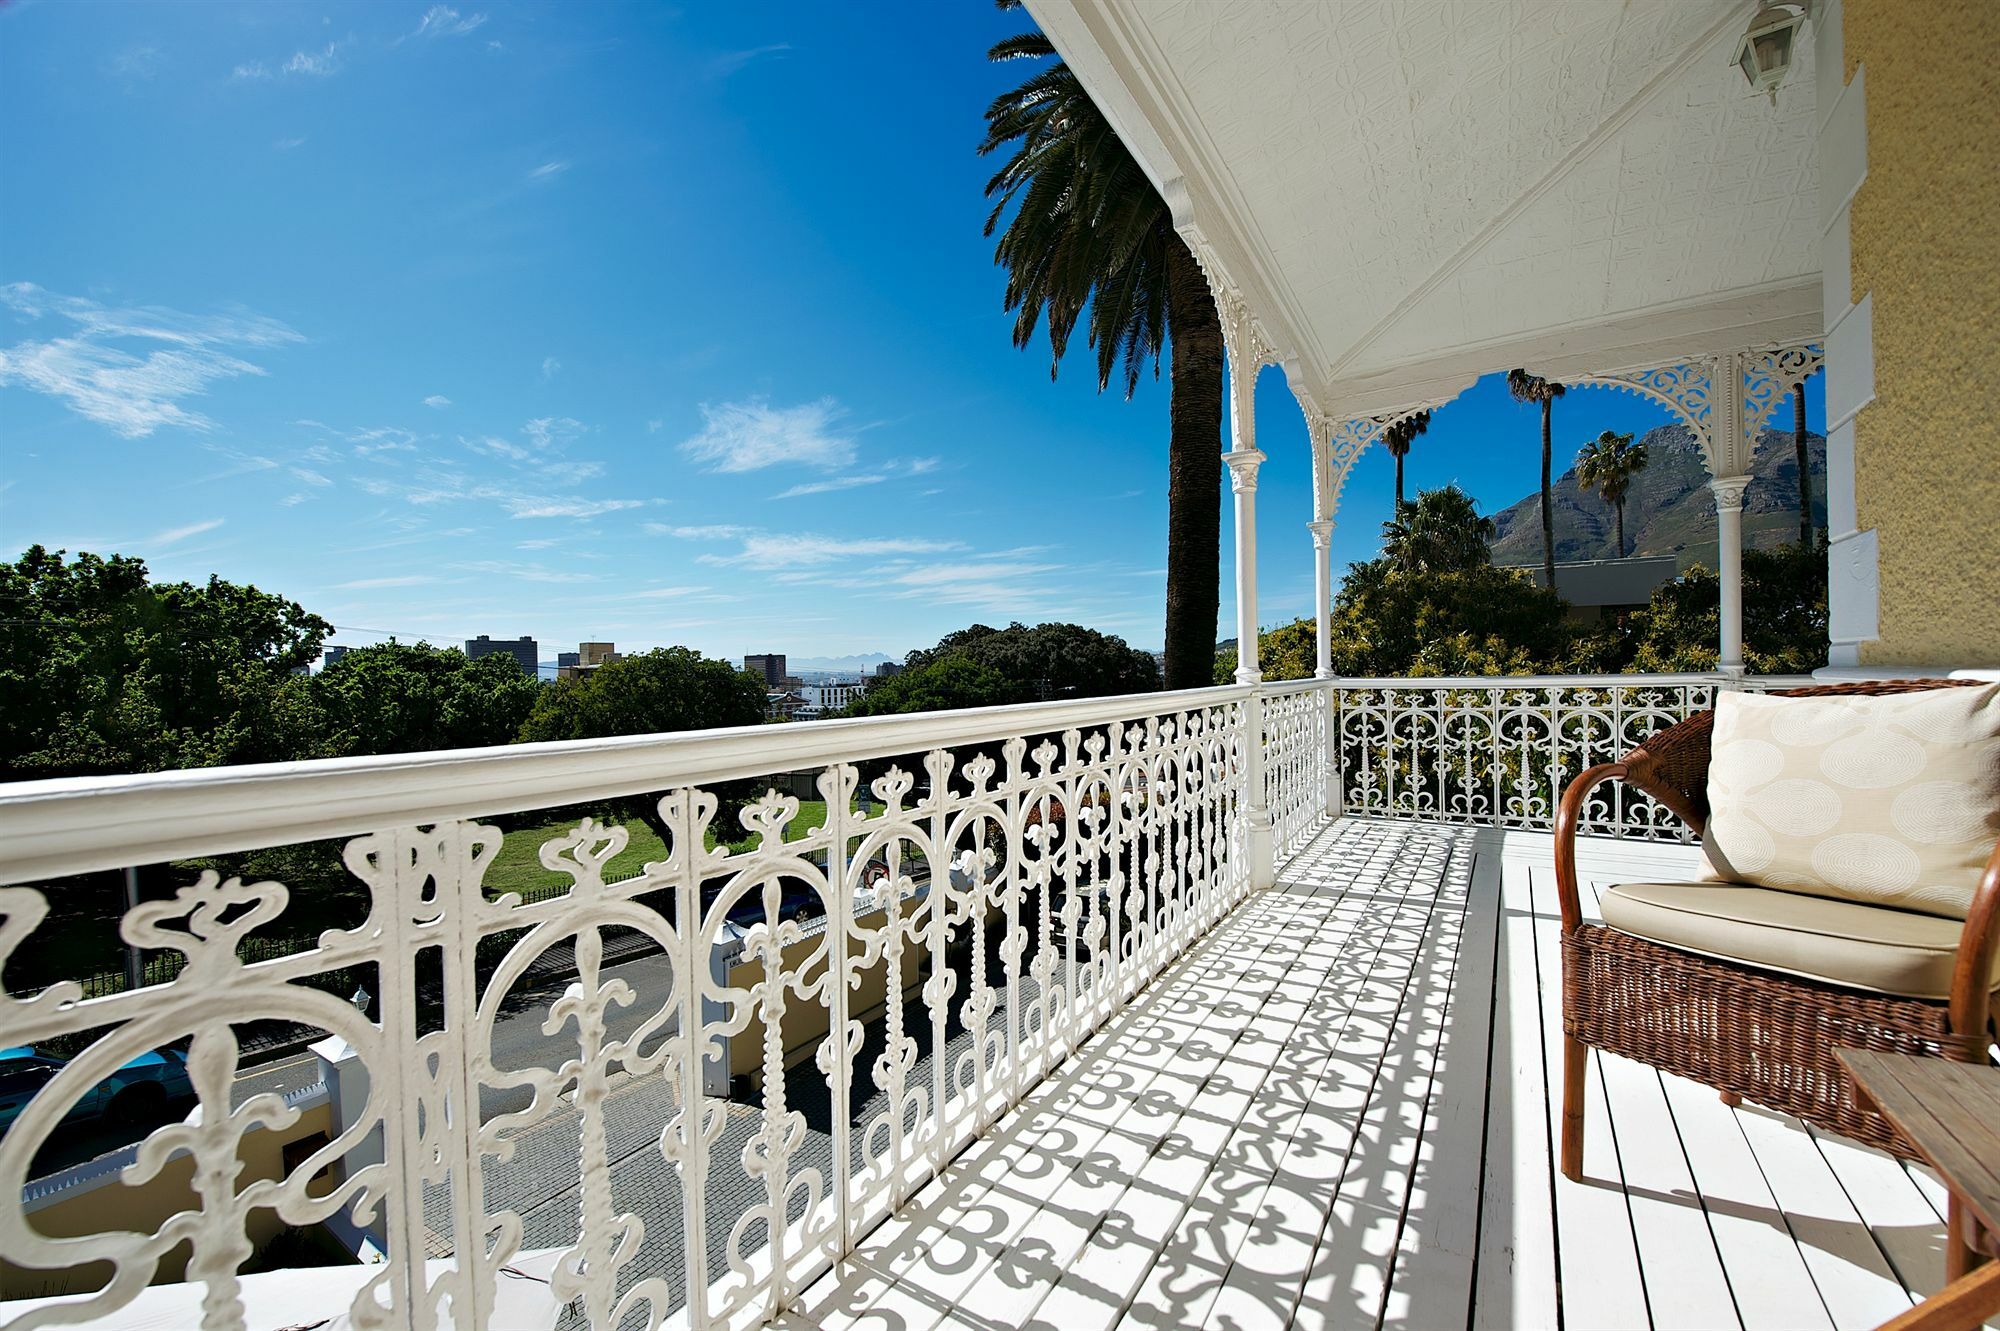 The Walden House Hotel Cape Town Exterior photo